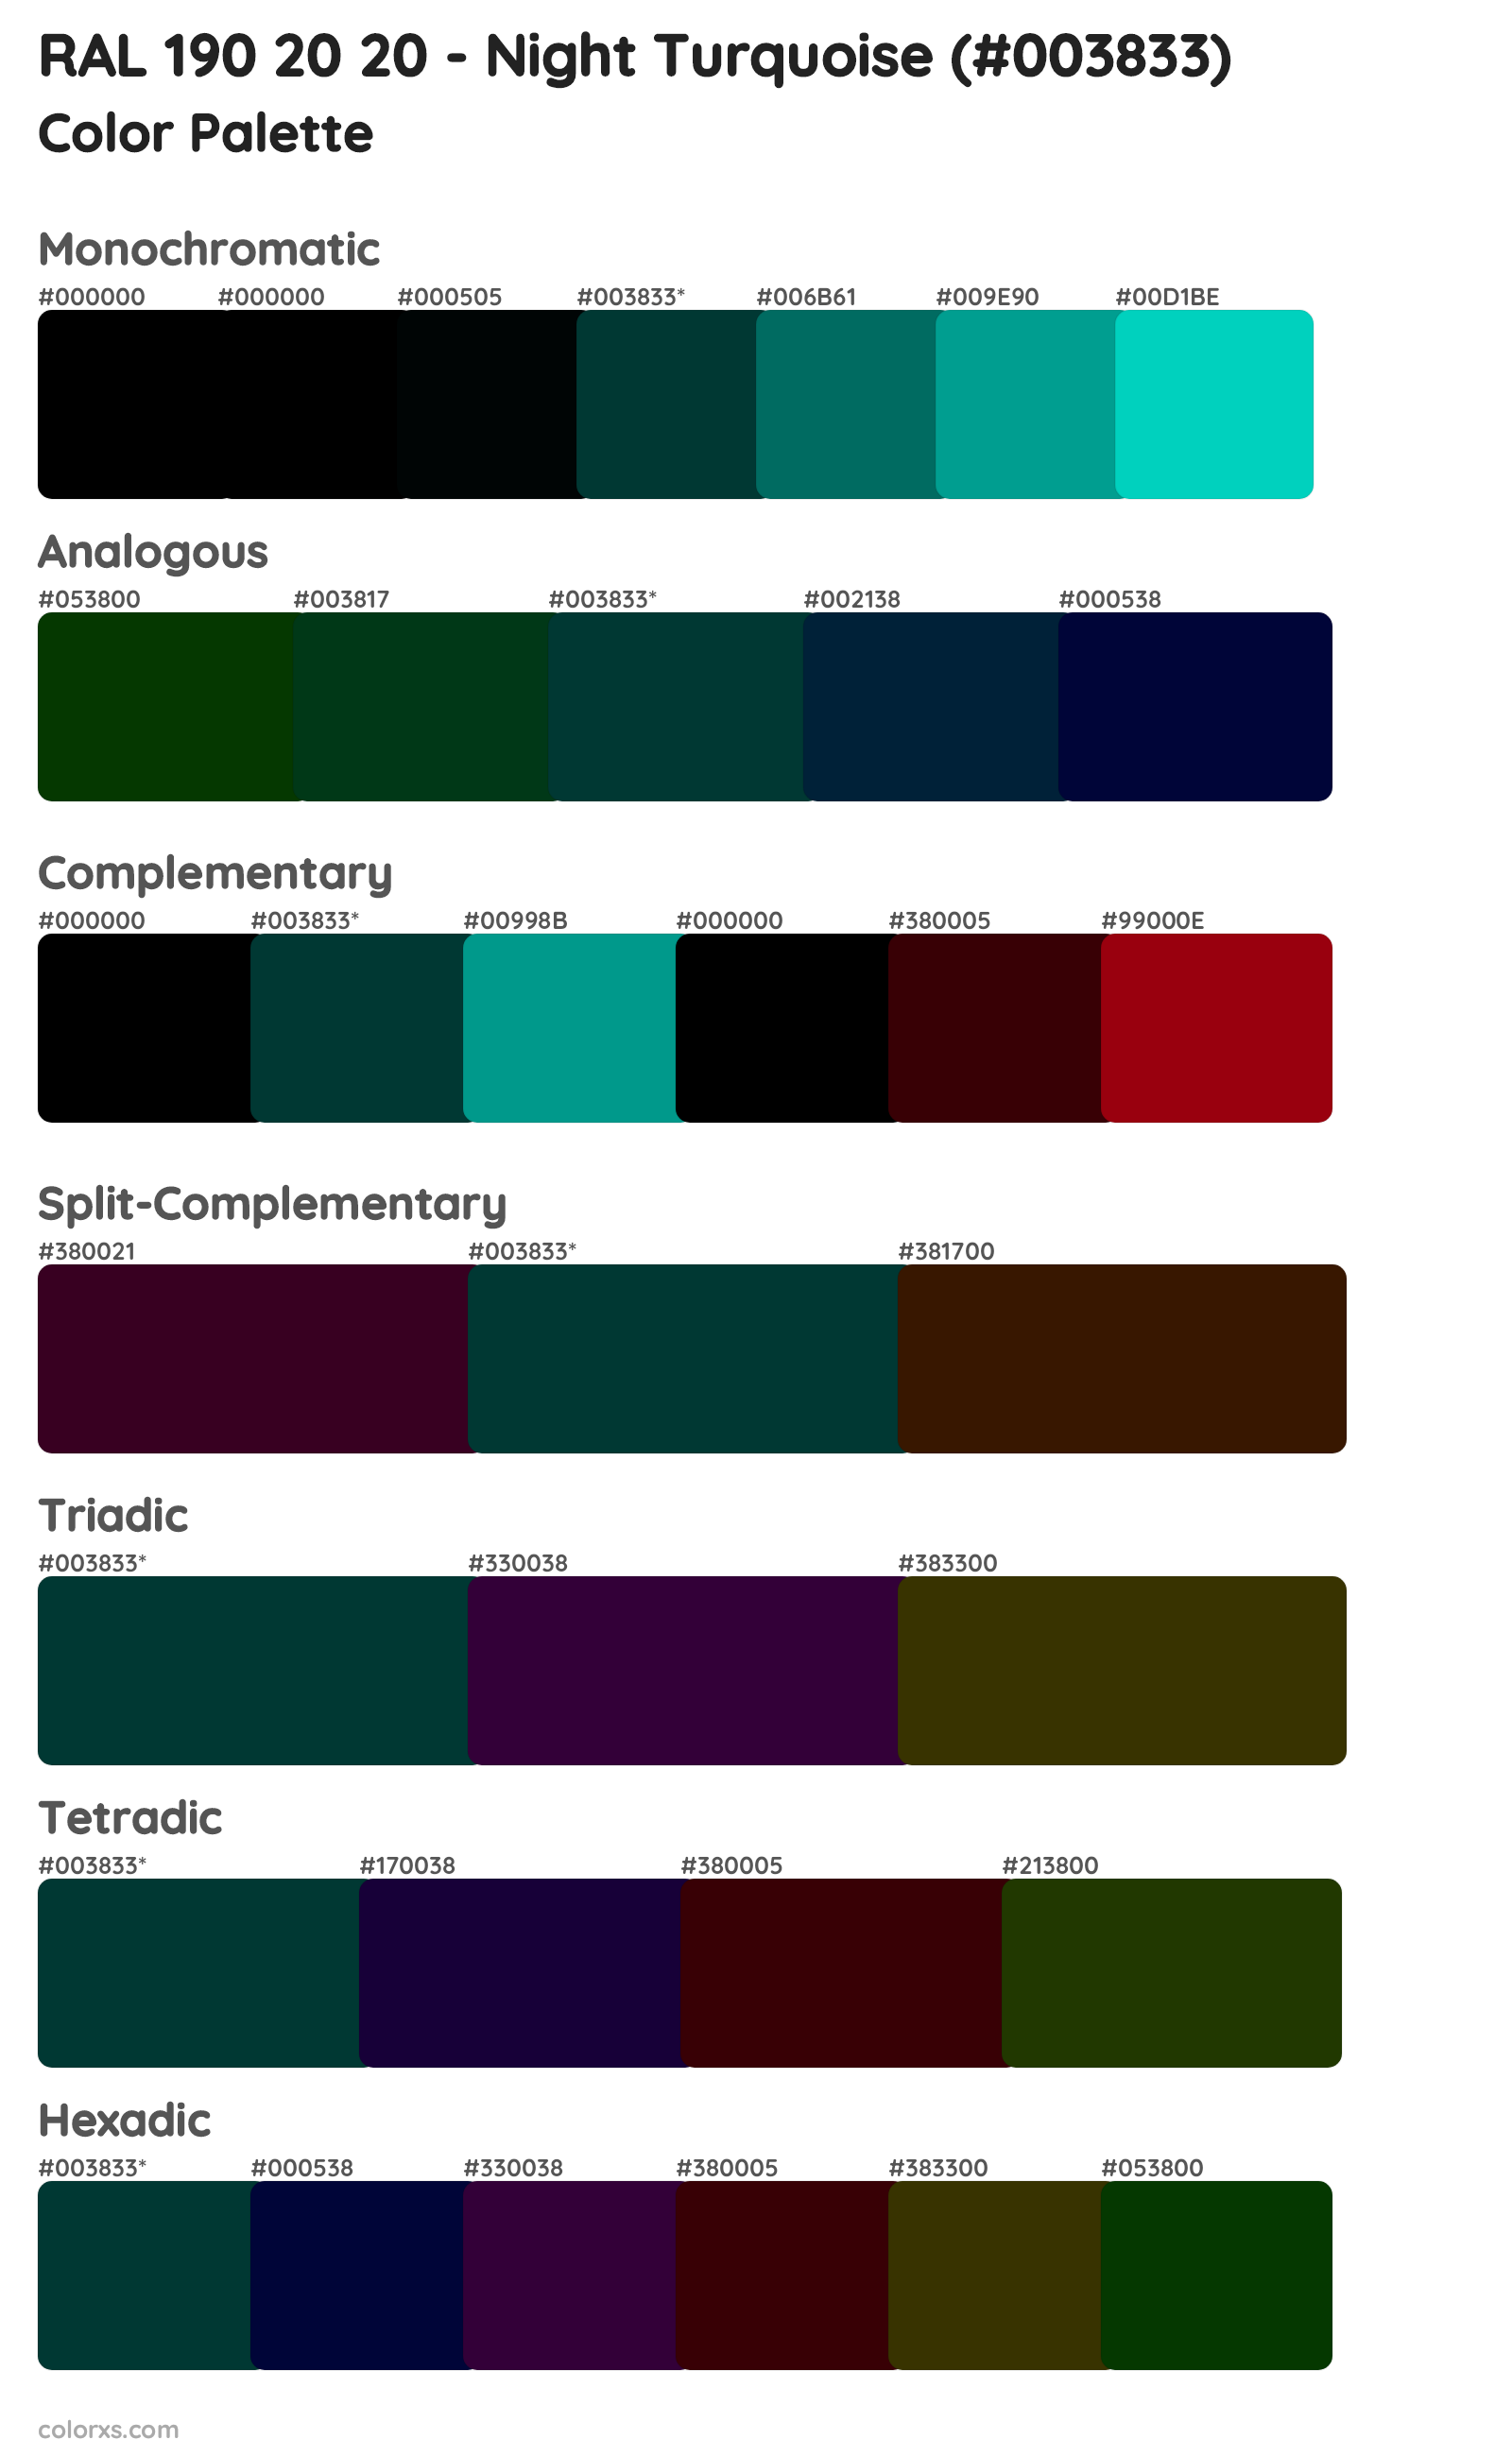 RAL 190 20 20 - Night Turquoise Color Scheme Palettes